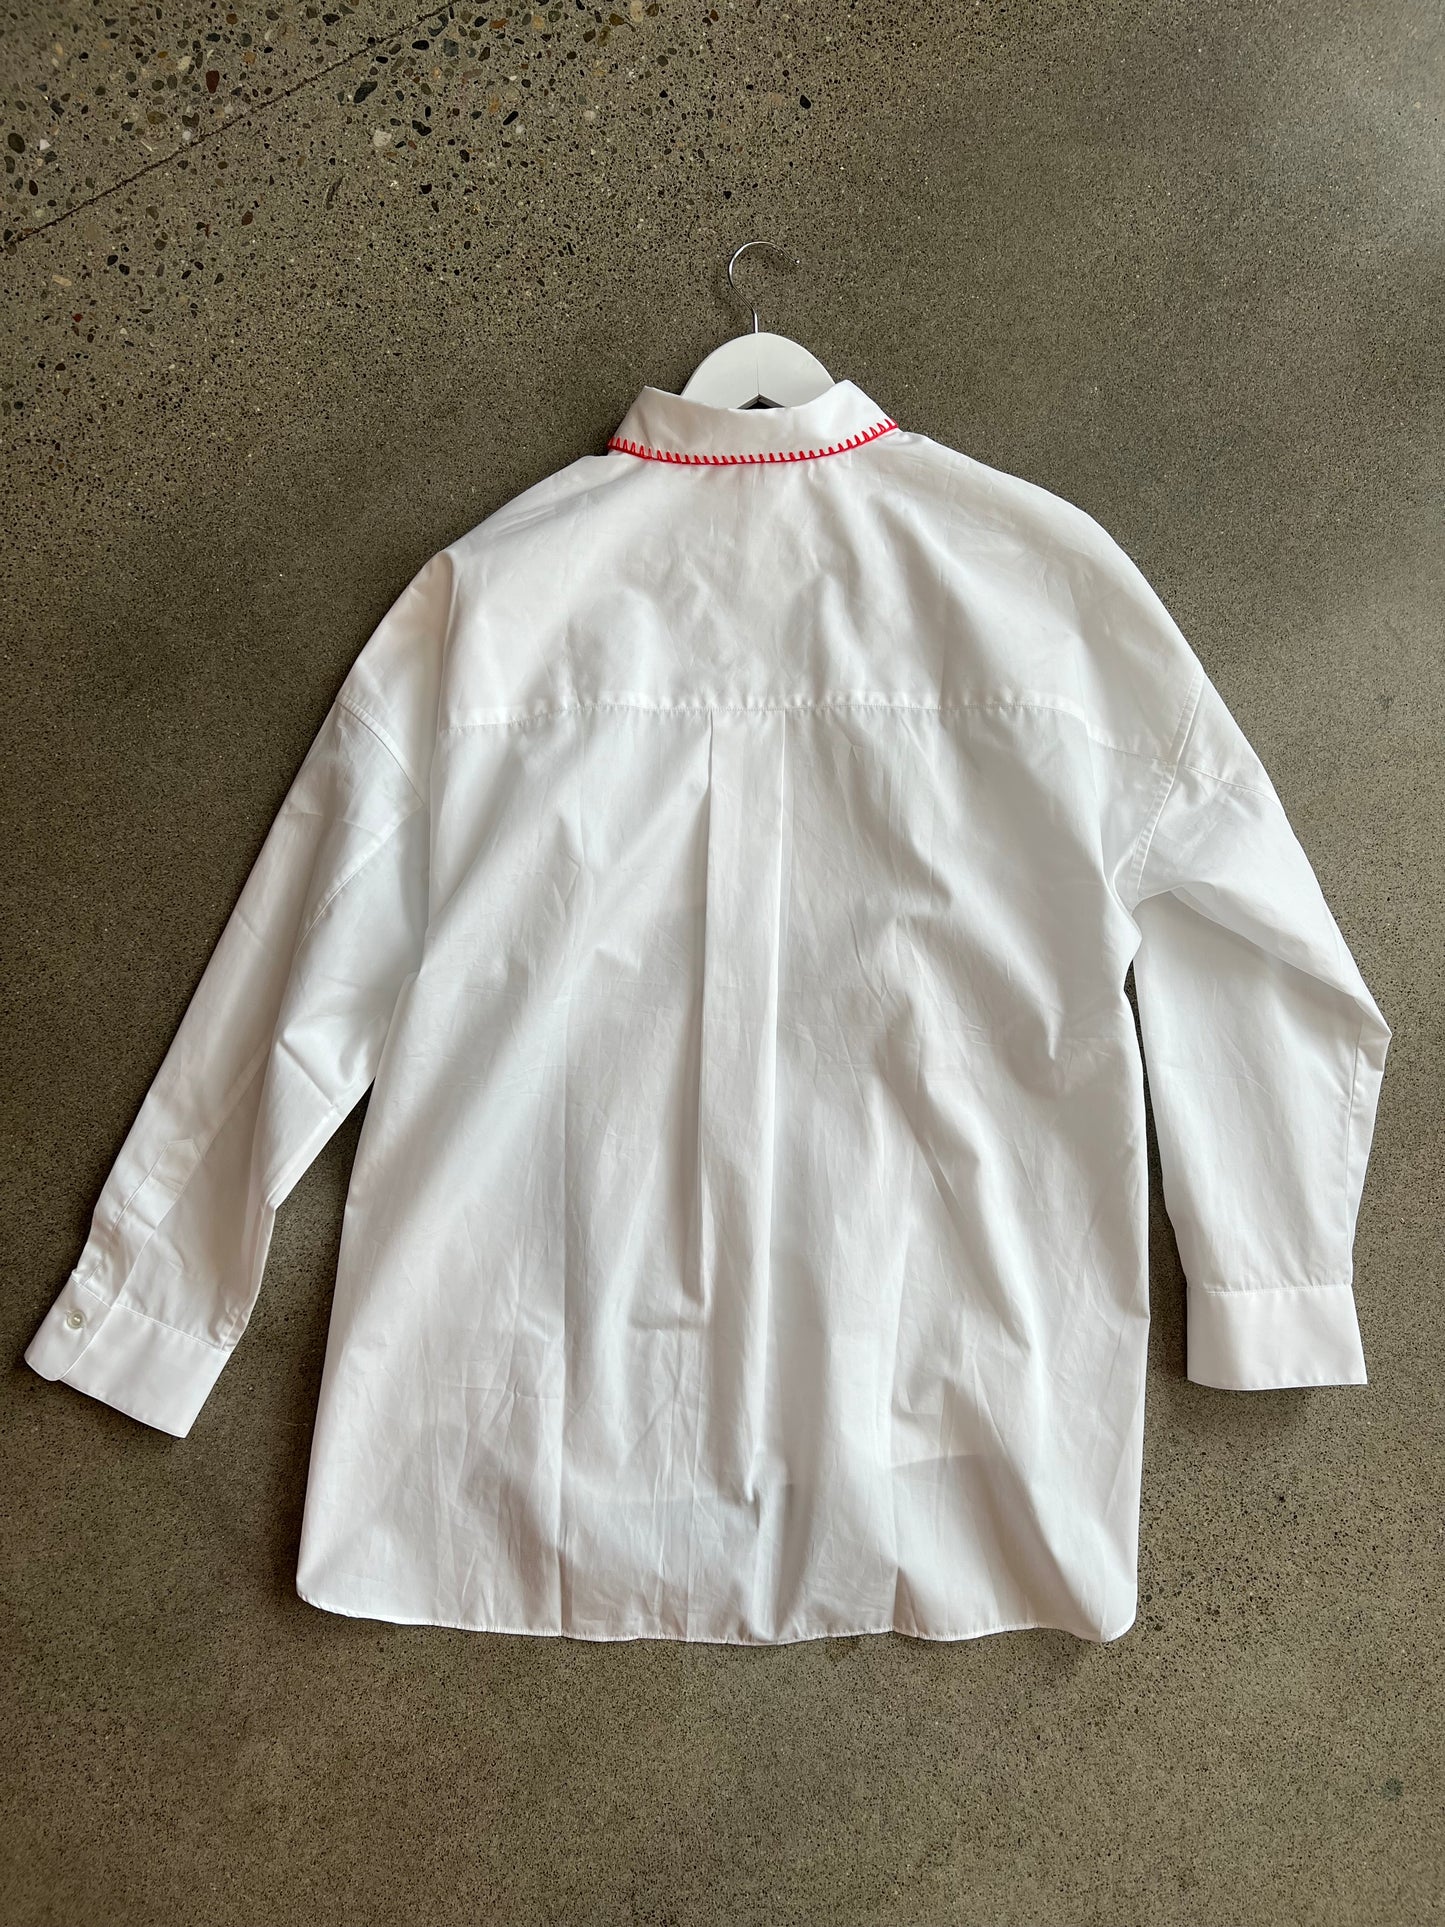 Caliban - White Shirt With Red Stitching